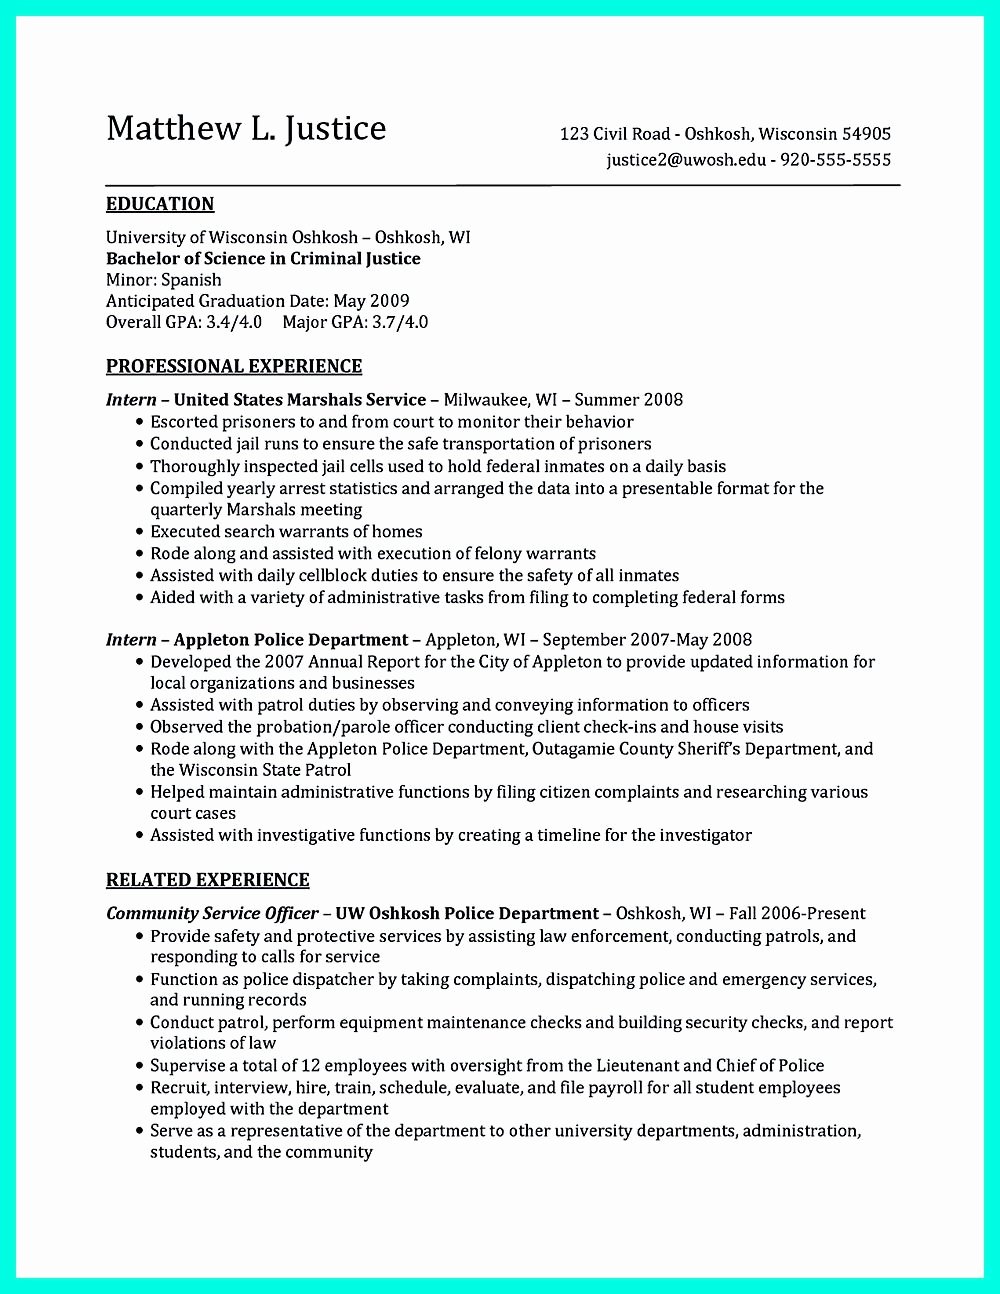 Criminal Justice Resume Uses Summary Section Of the